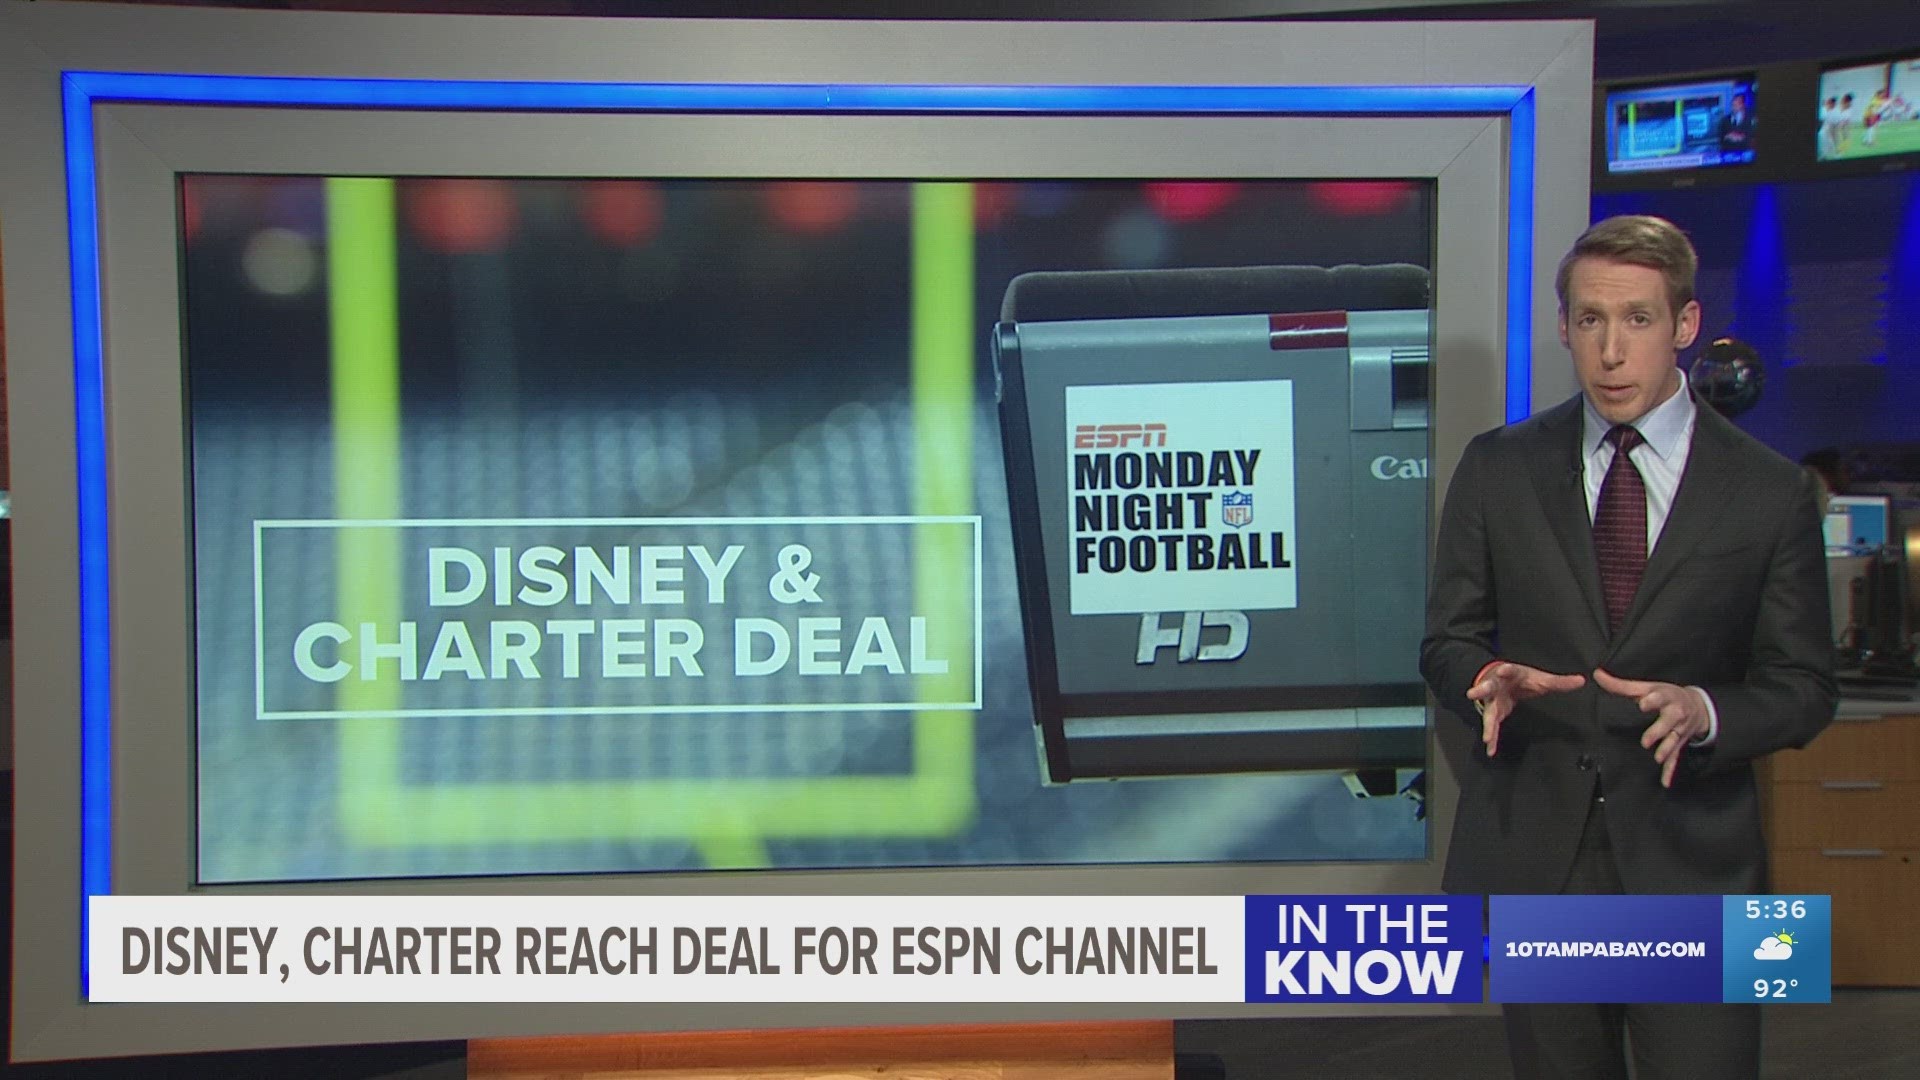 Disney and Charter reach deal, ending cable blackout for millions